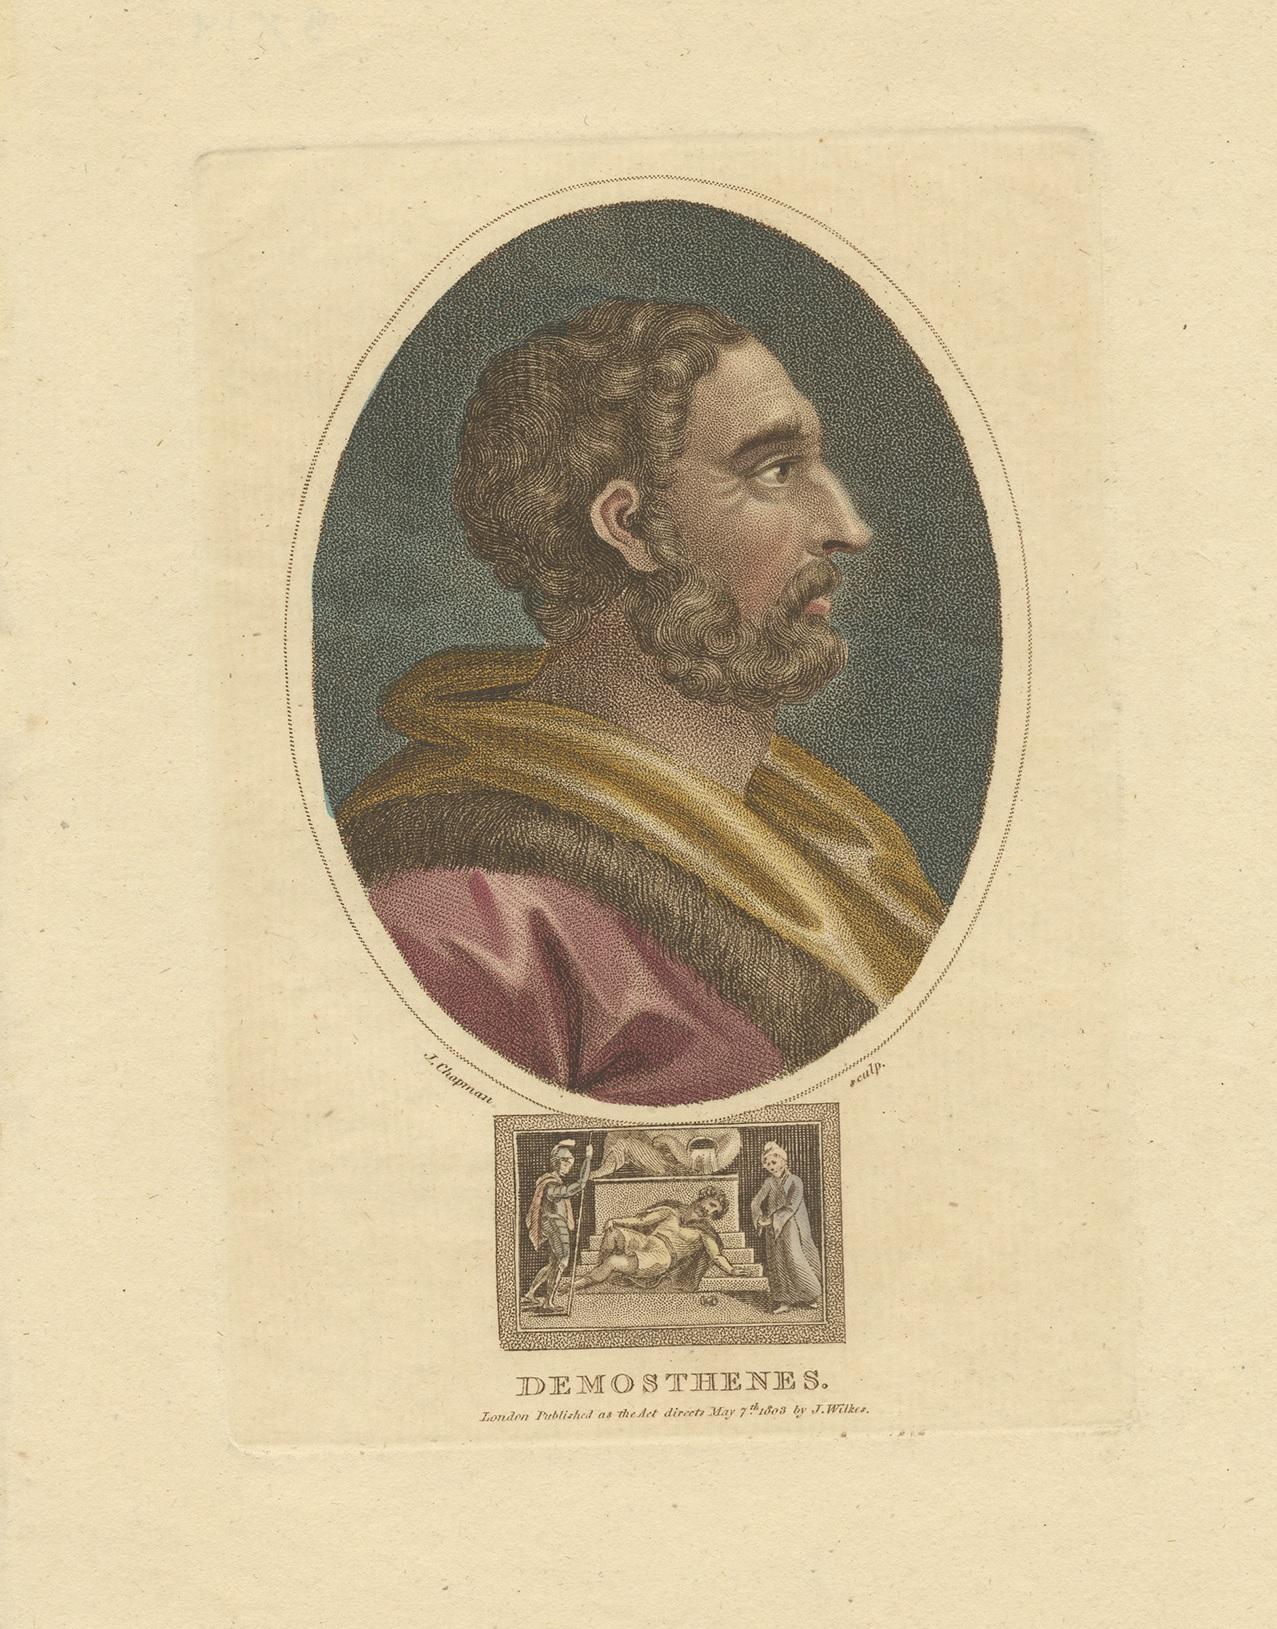 Antique print titled 'Demosthenes'. Portrait of Demosthenes, bust-length in profile to right, in an oval, with a rectangular scene below showing the suicide of Demosthenes. One of a number of stipple heads of Kings and Queens published by J. Wilkes.